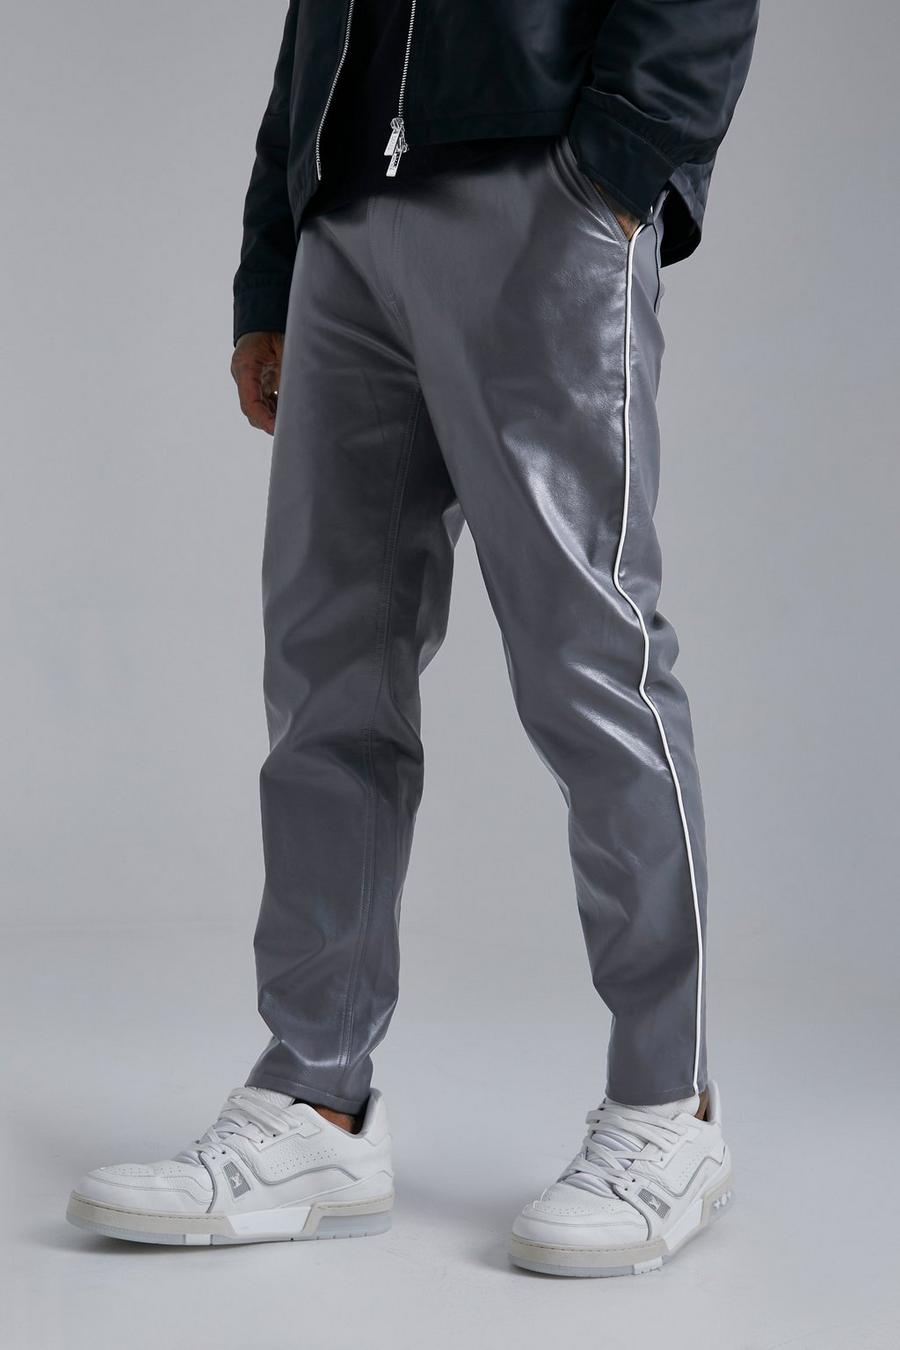 Charcoal grey Fixed Waist Tapered PU Side Piping Trouser